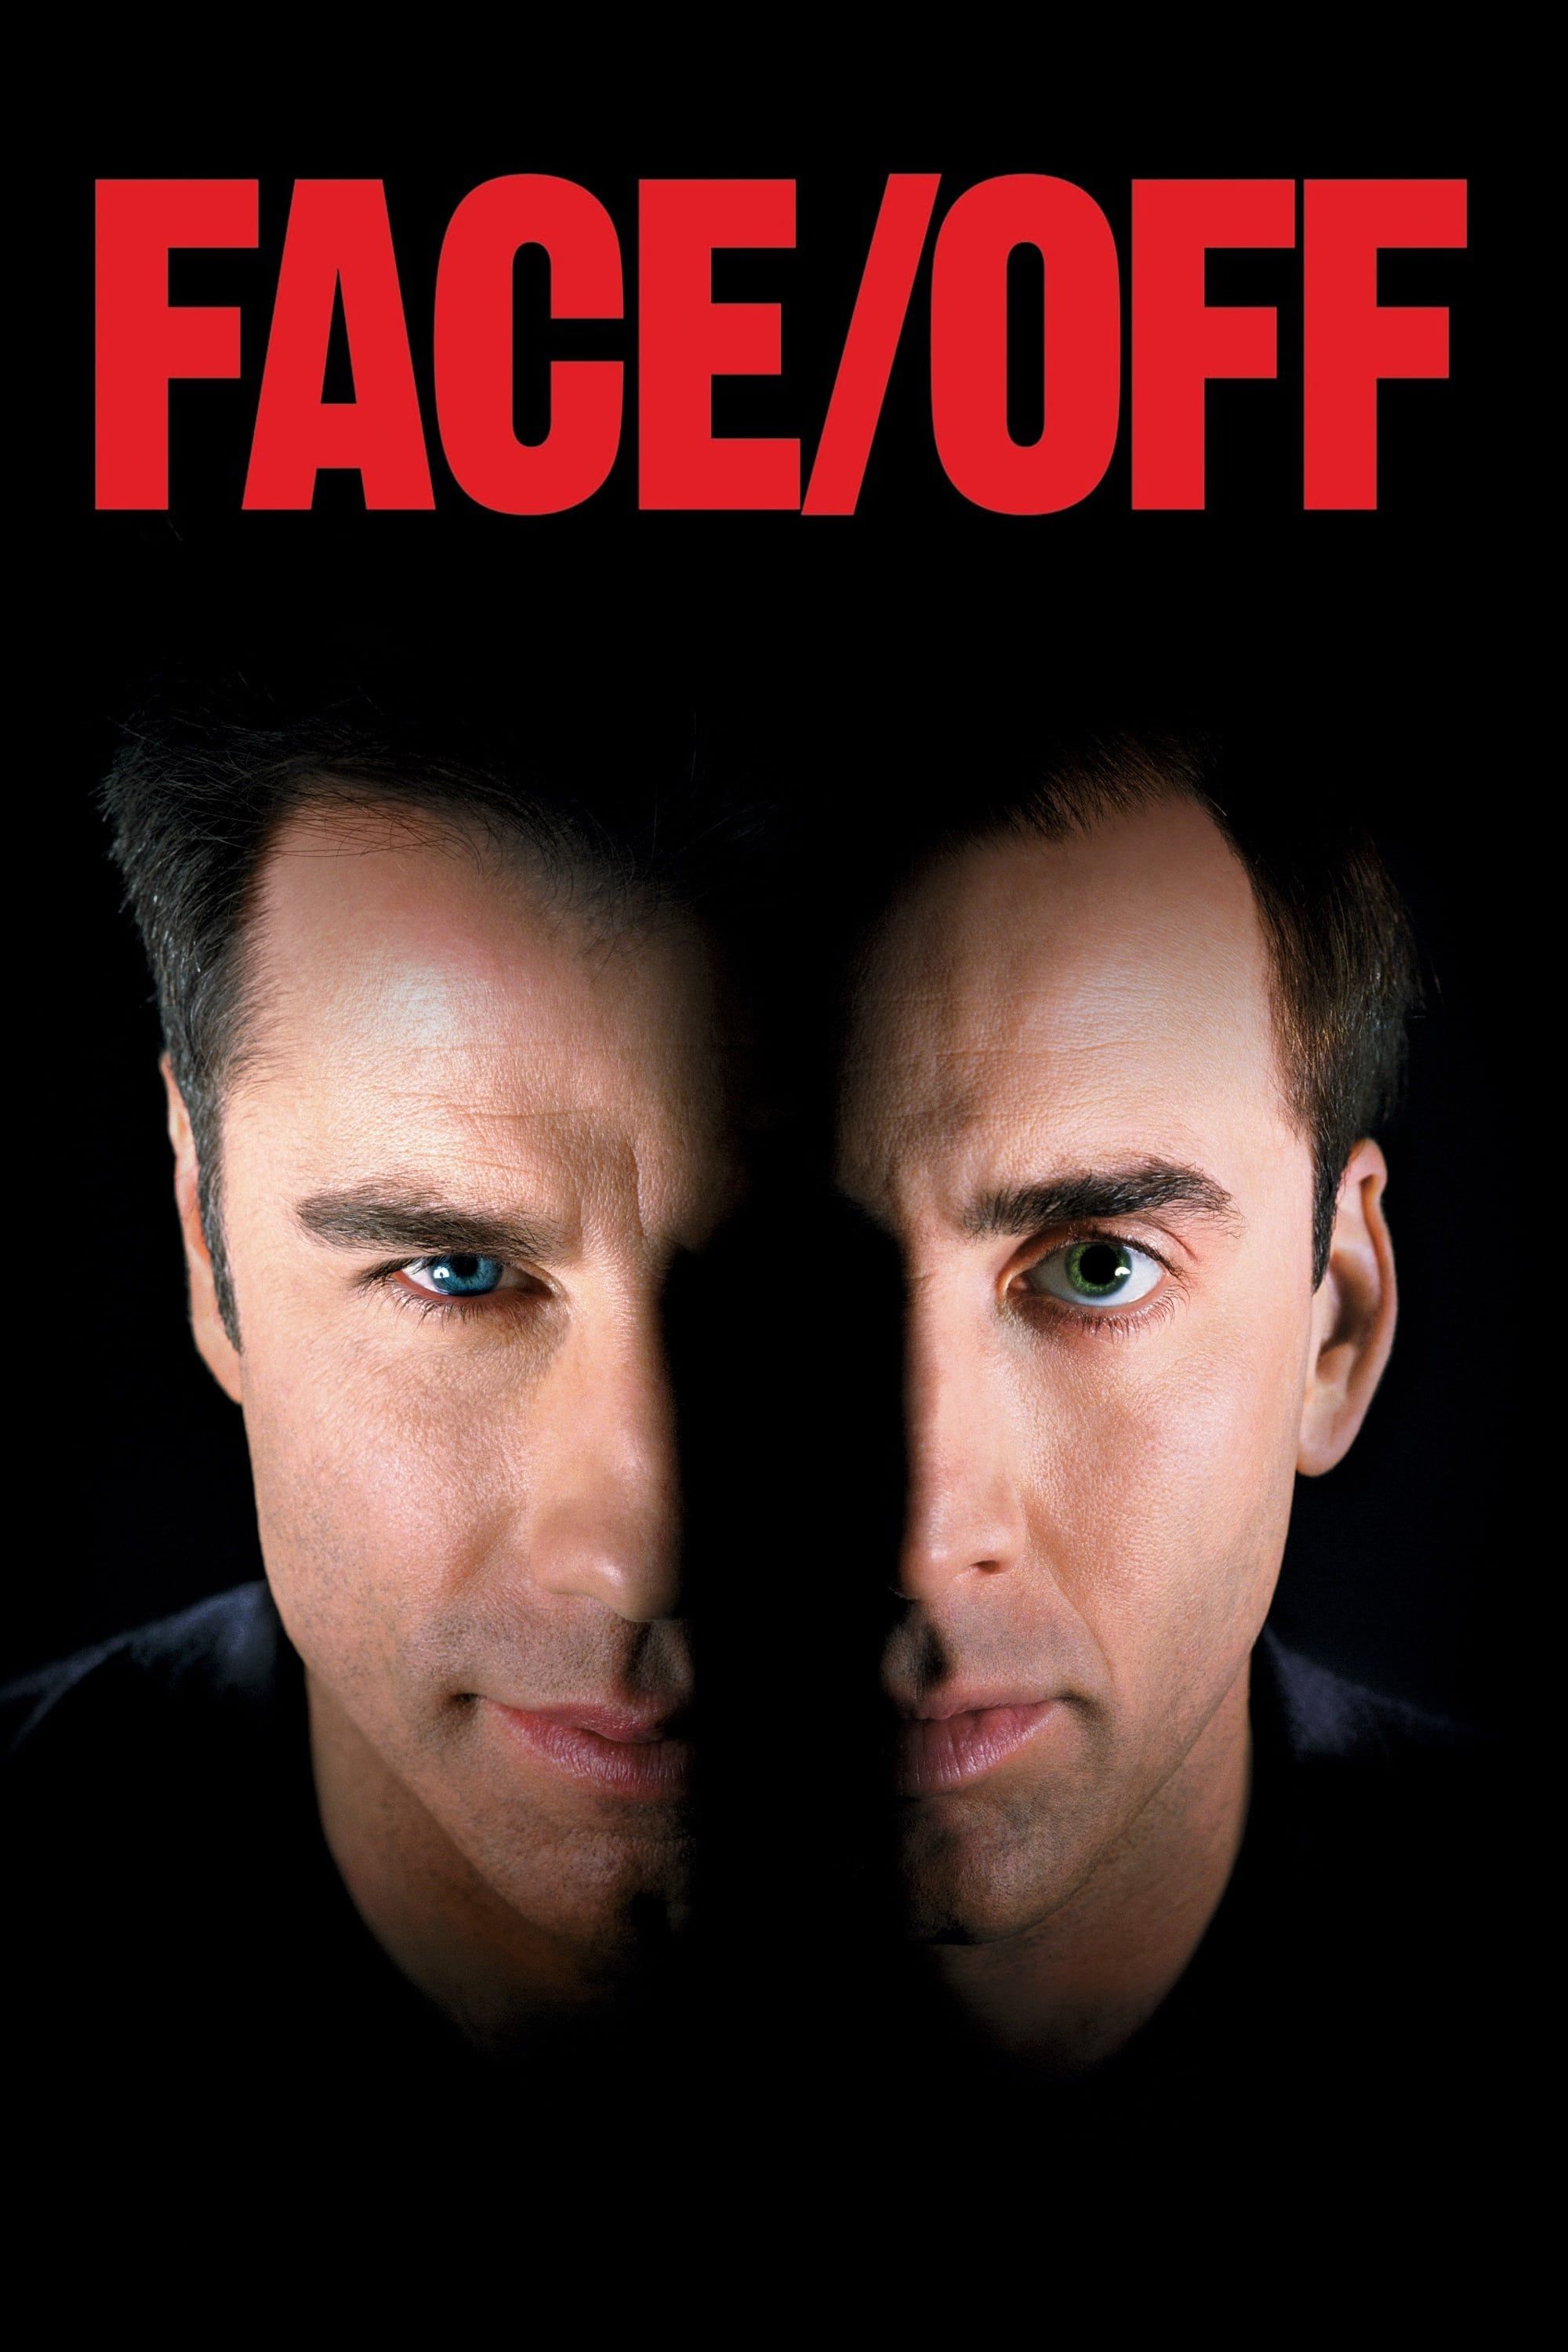 Face / Off